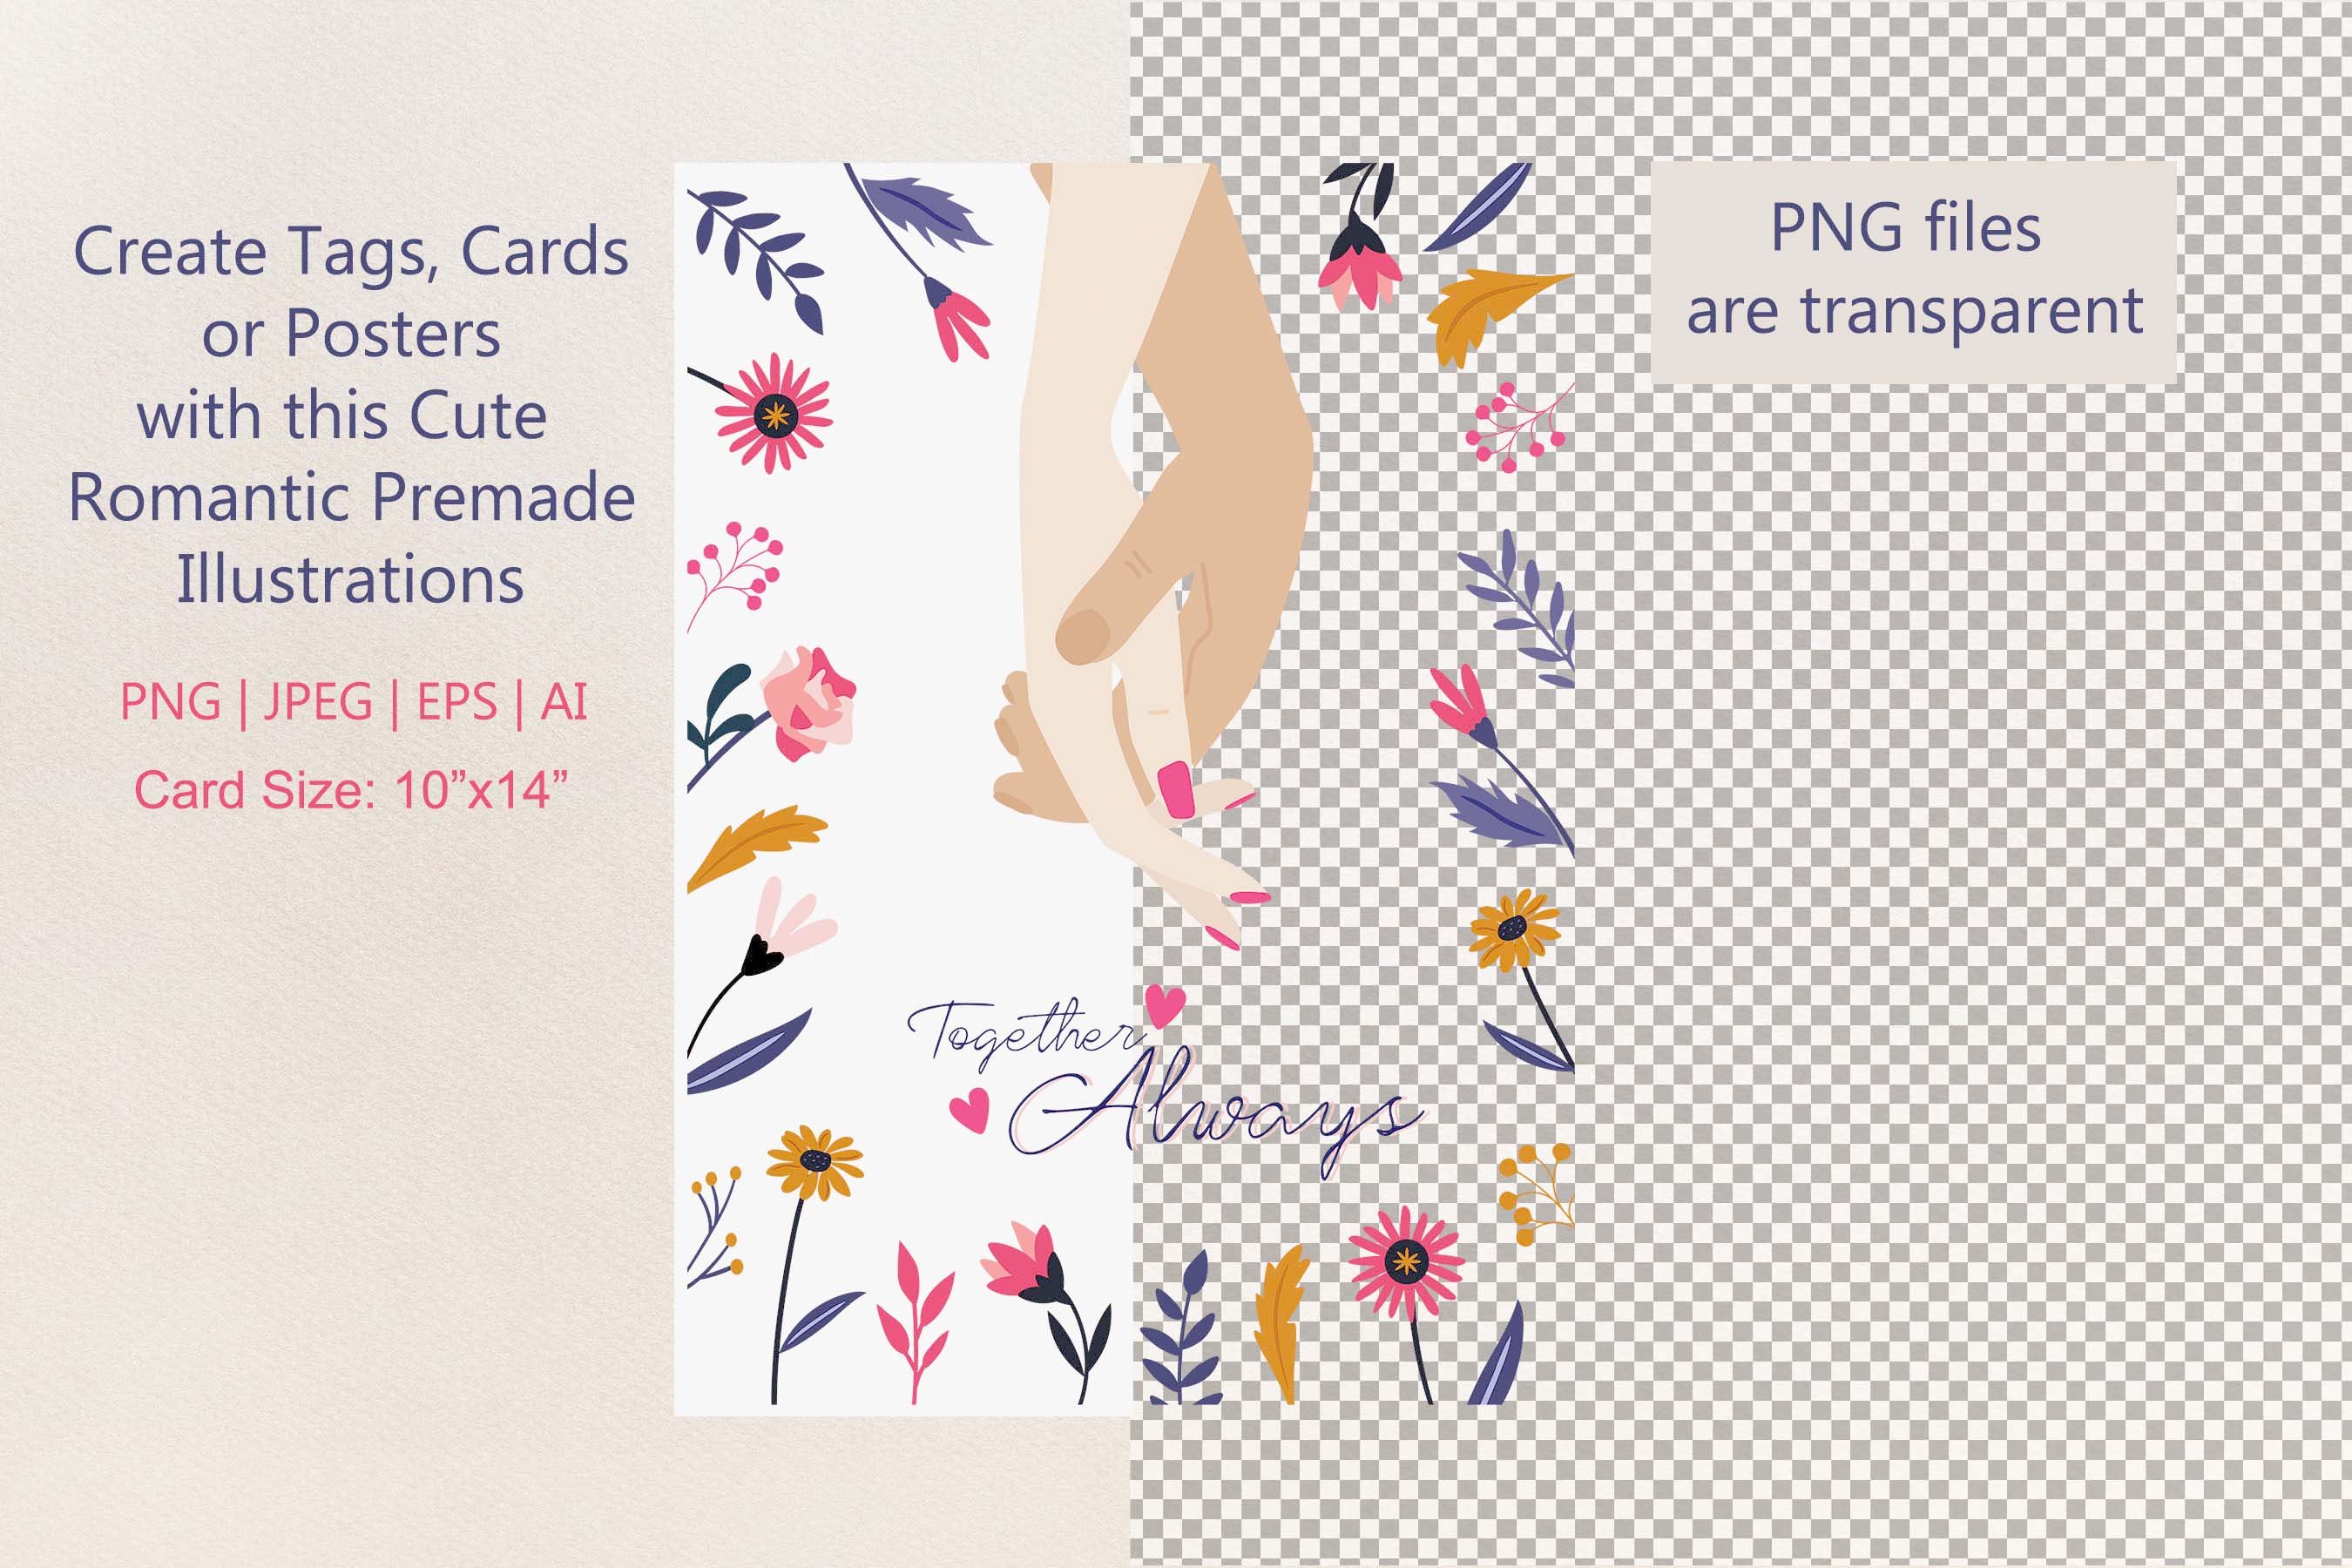 Create tags, cards or posters with this cute romantic premade illustrations.